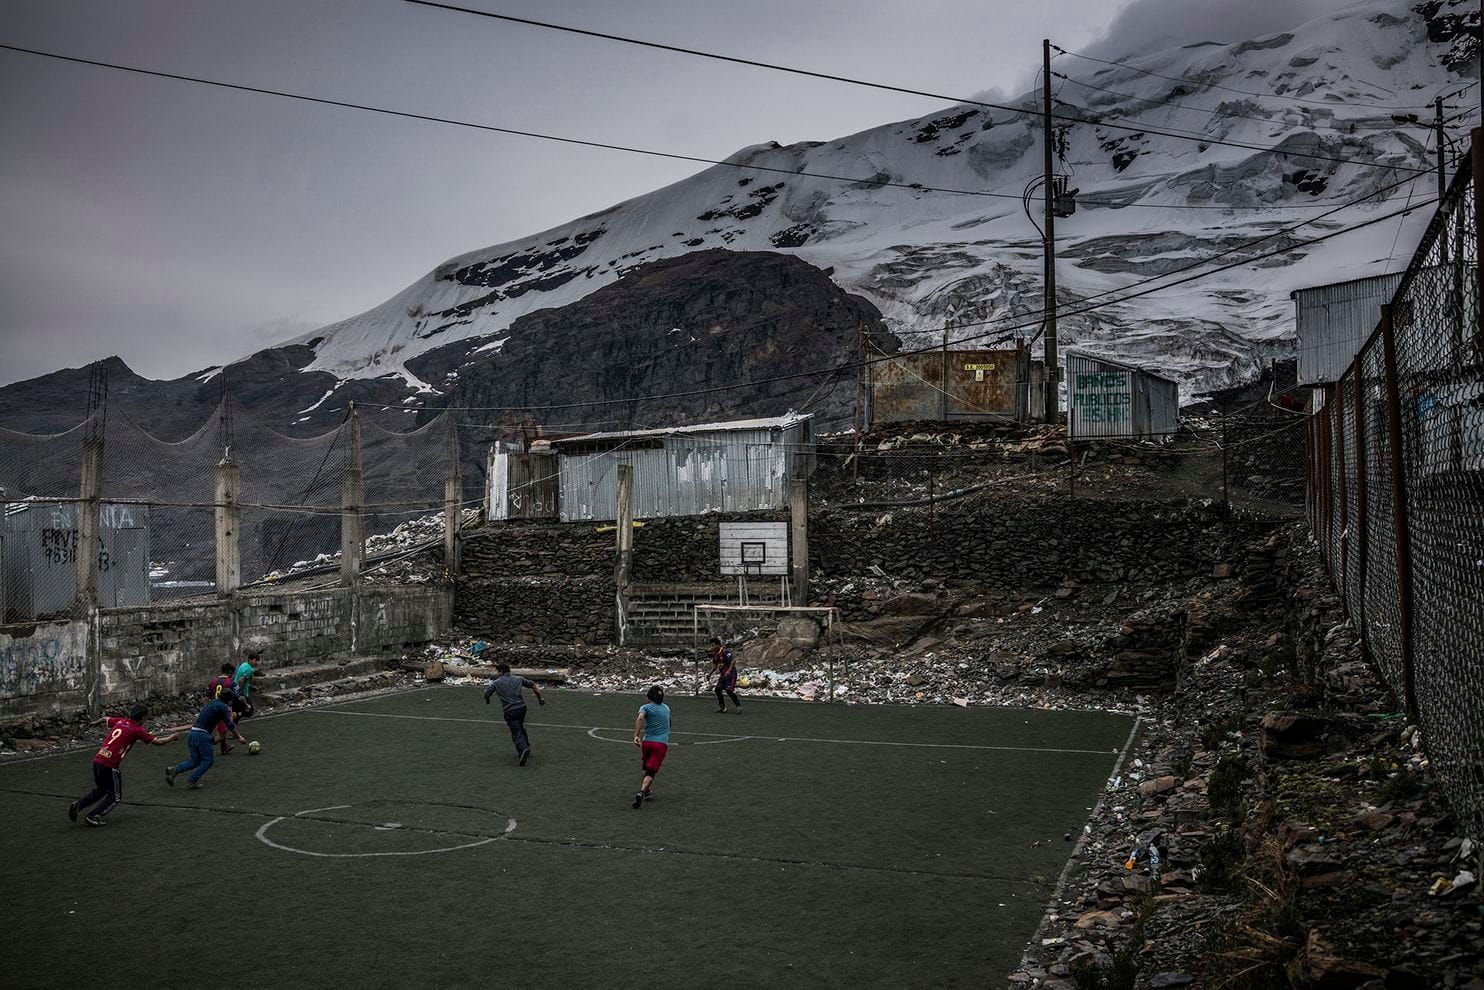 Men play soccer on artificial turf. Grass does not grow at 17,700 feet. Peru, 2019. Image by James Whitlow Delano.